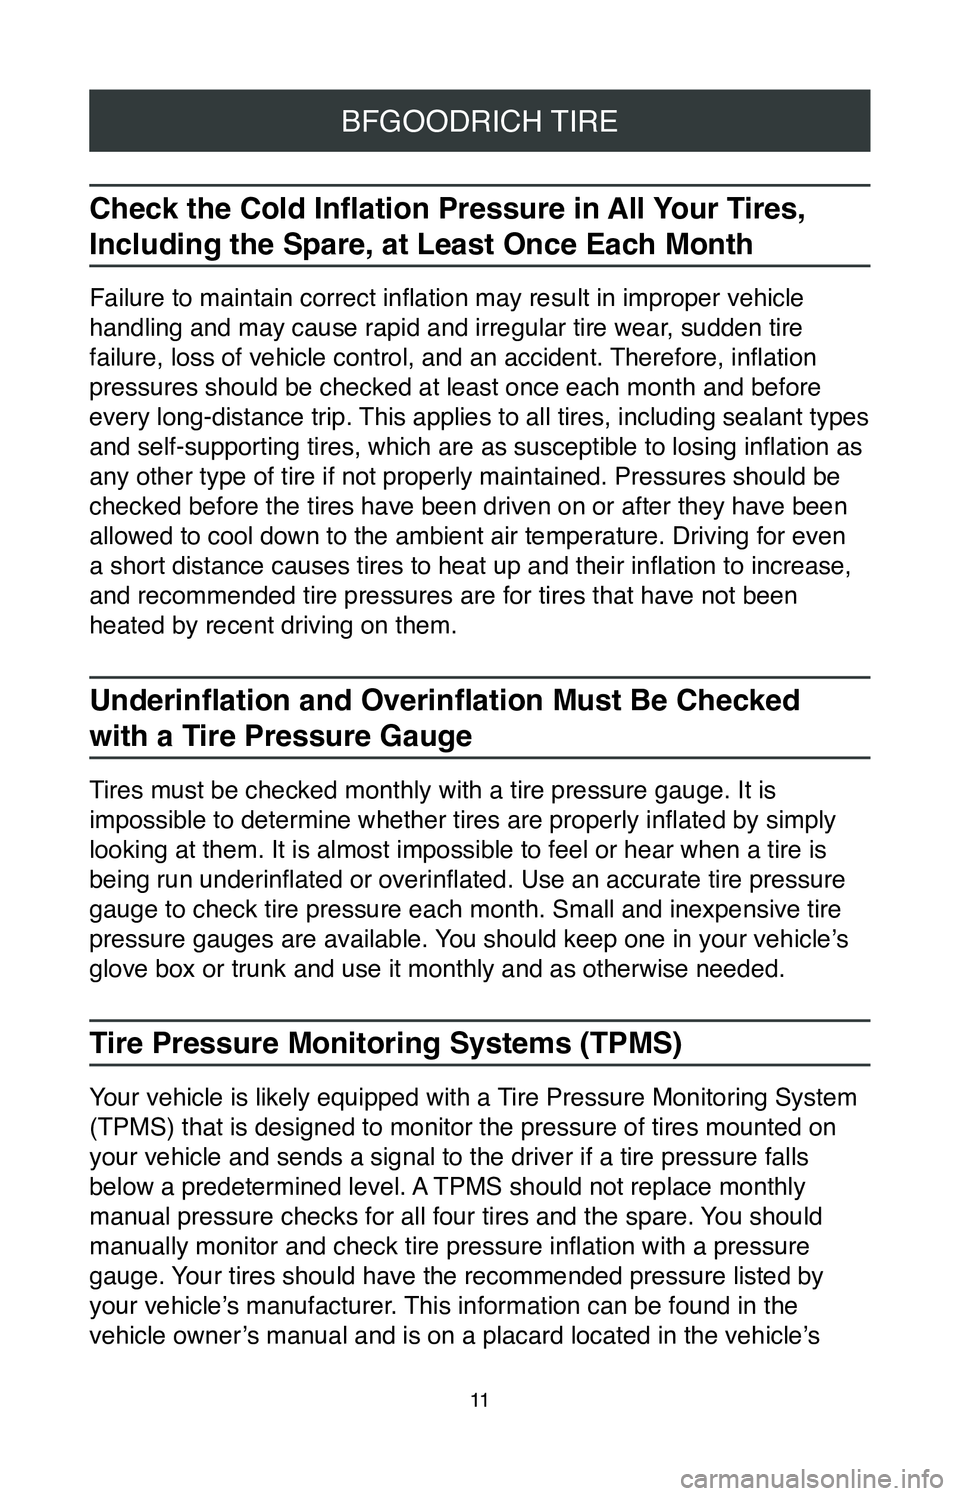 TOYOTA CAMRY 2020  Warranties & Maintenance Guides (in English) 11
BFGOODRICH TIRE
Check the Cold Inflation Pressure in All Your Tires, 
Including the Spare, at Least Once Each Month
Failure to maintain correct inflation may result in improper vehicle 
handling an